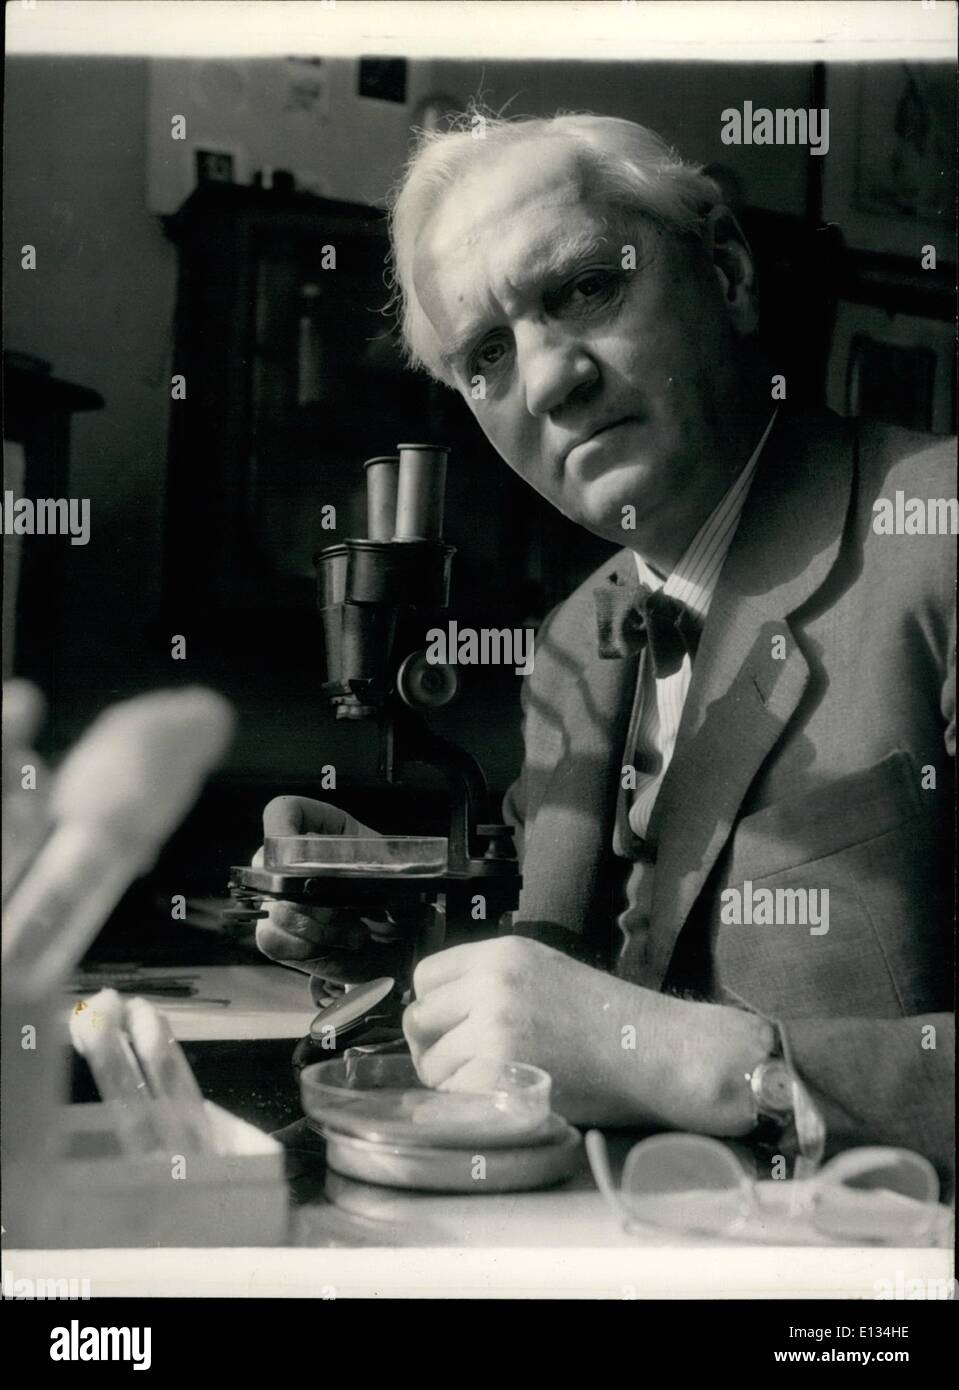 Feb. 28, 2012 - Sir Alexander Fleming: The Man Who Discovered Penicillin 25  Years Ago: The famous bacteriologist, director of the Wright -Fleming  Institute, works with his microscope in his laboratory at